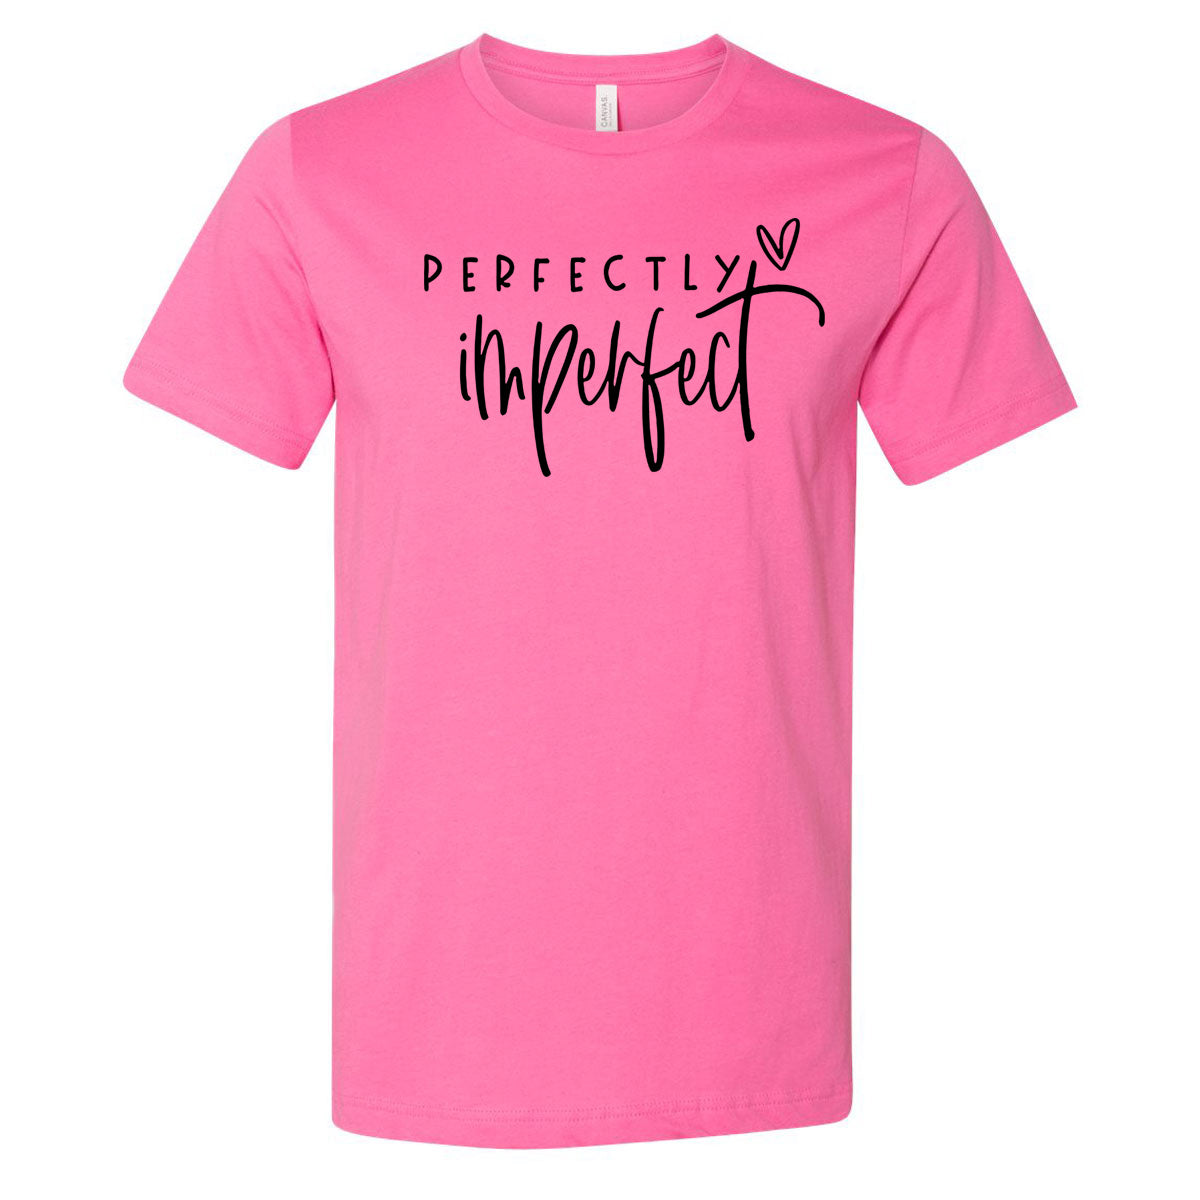 Perfectly Imperfect - Charity Pink Short Sleeve Tee - Southern Grace Creations